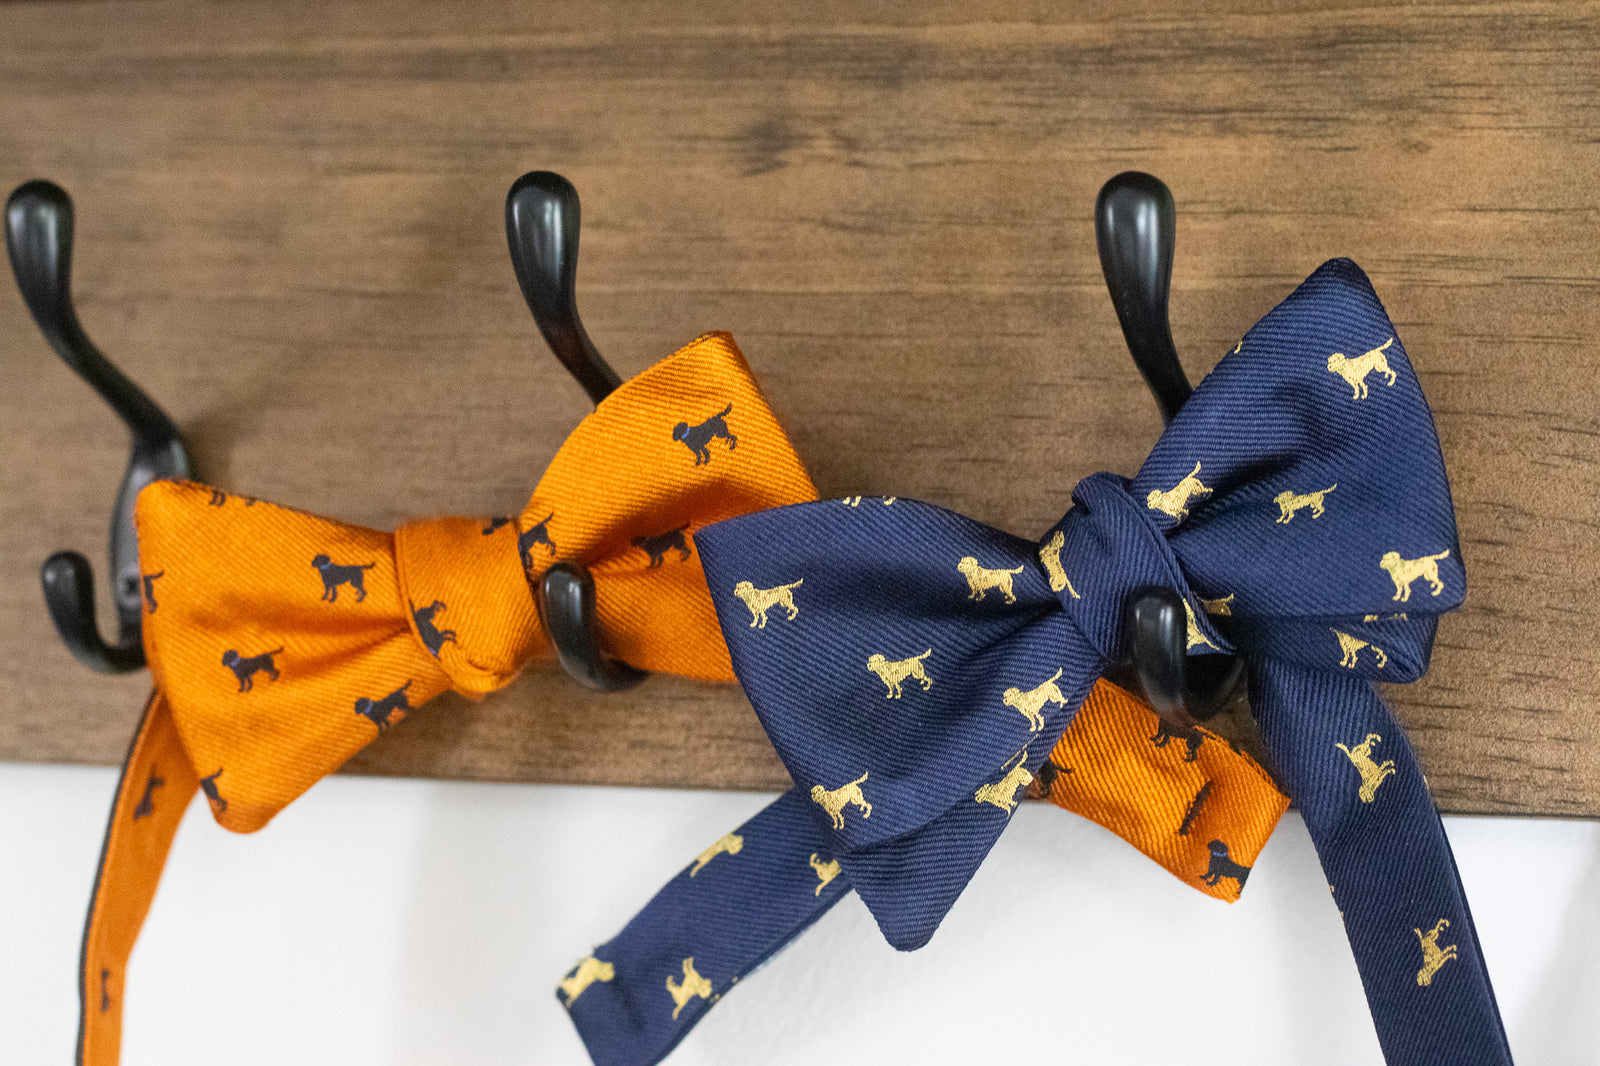 Dapper Duo: Bow Ties & Pocket Squares - High Cotton